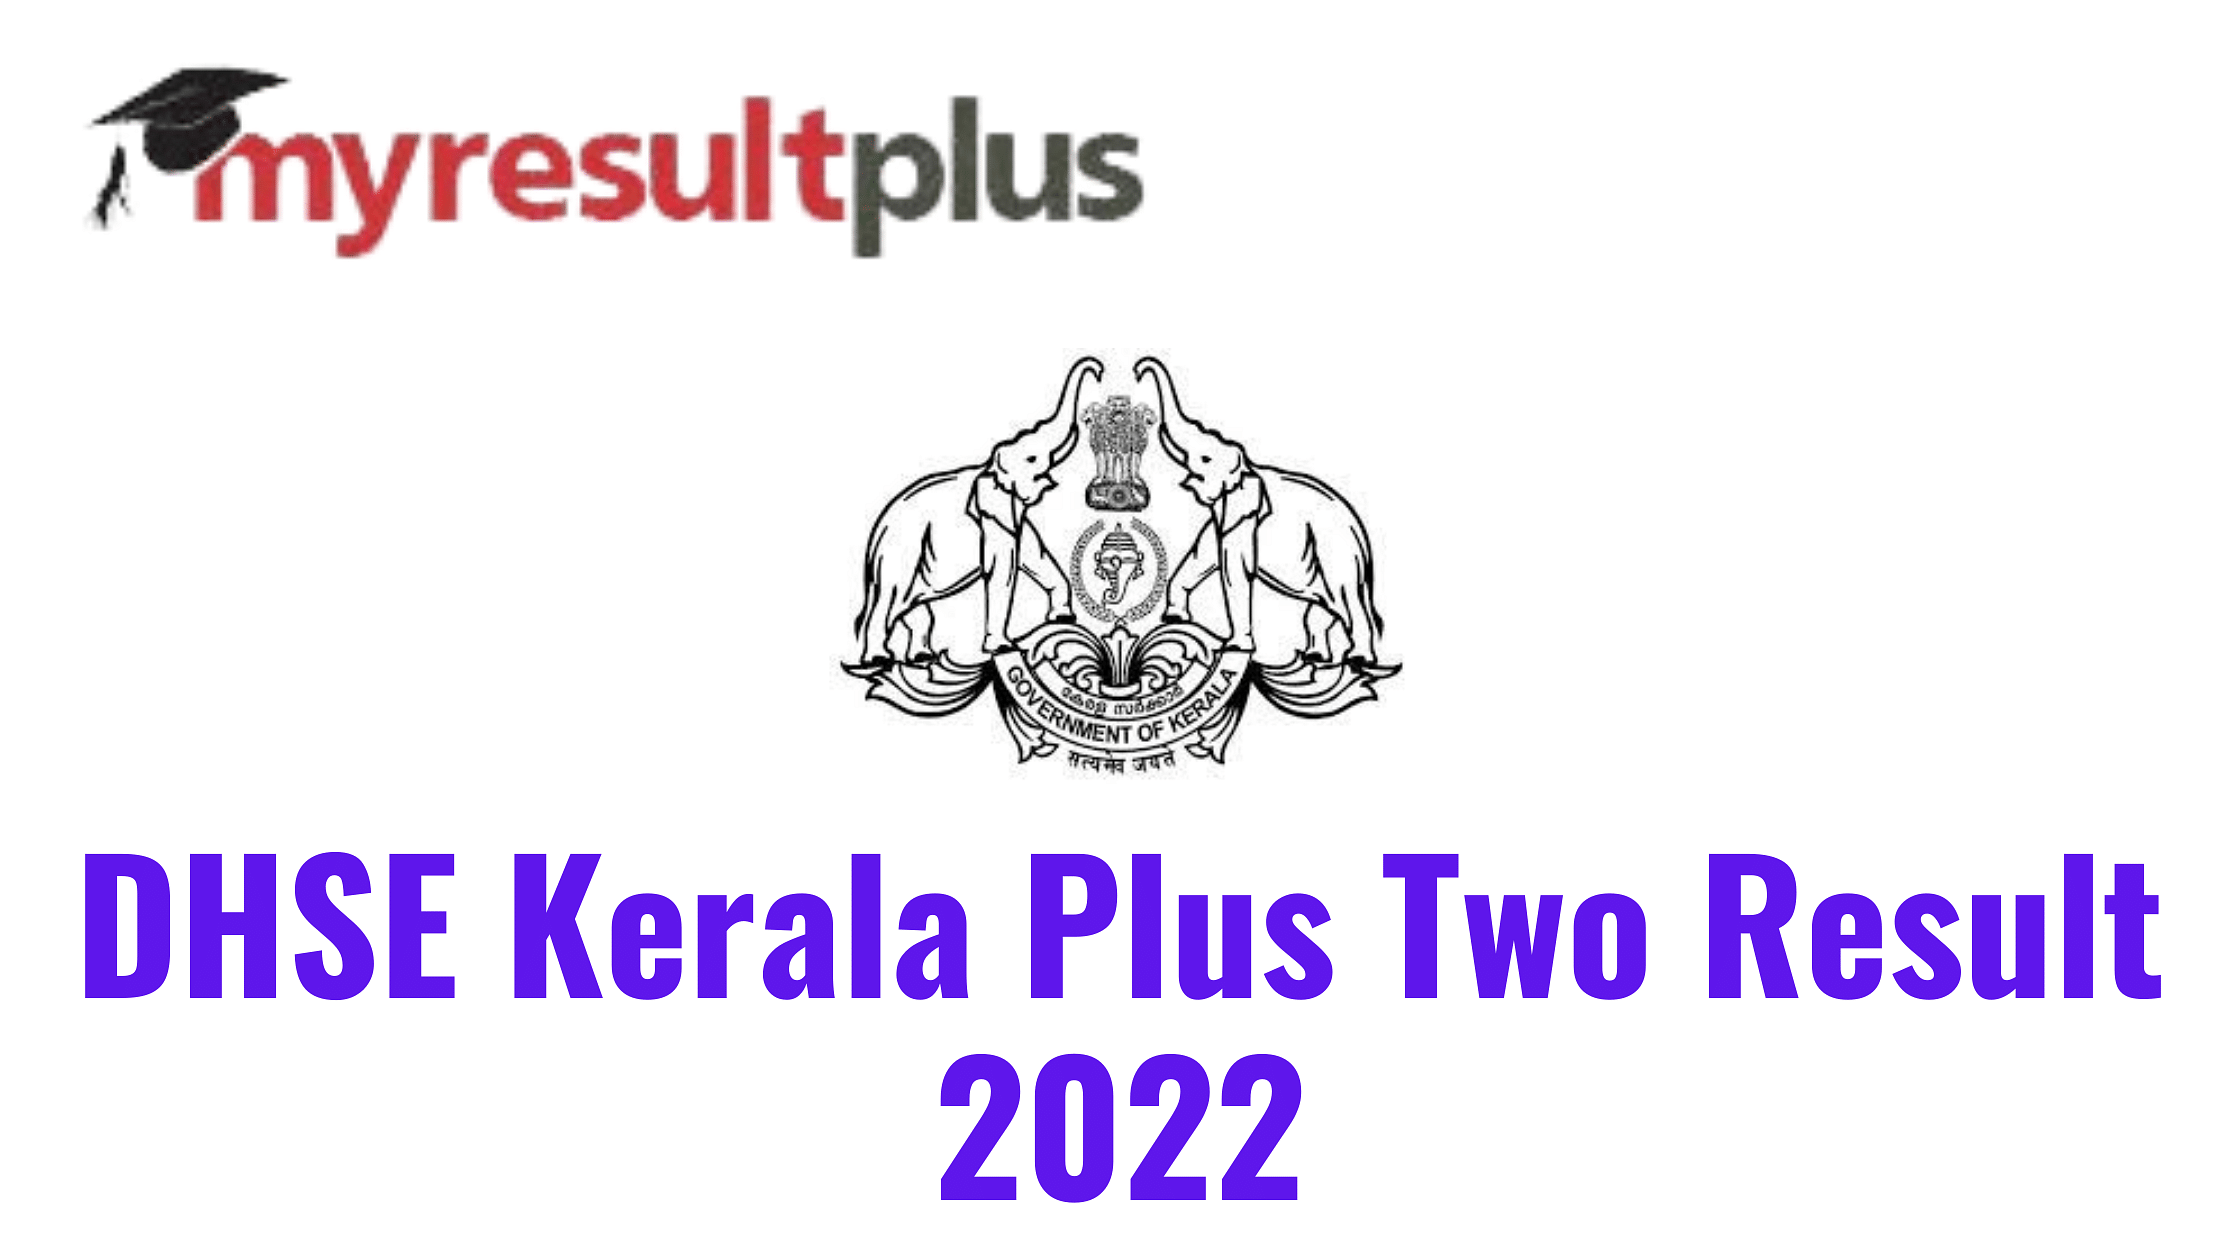 Kerala DHSE Result 2022: DHSE Expected to Declare Class 12 Results Tomorrow, Know Steps to Check Scorecard Here